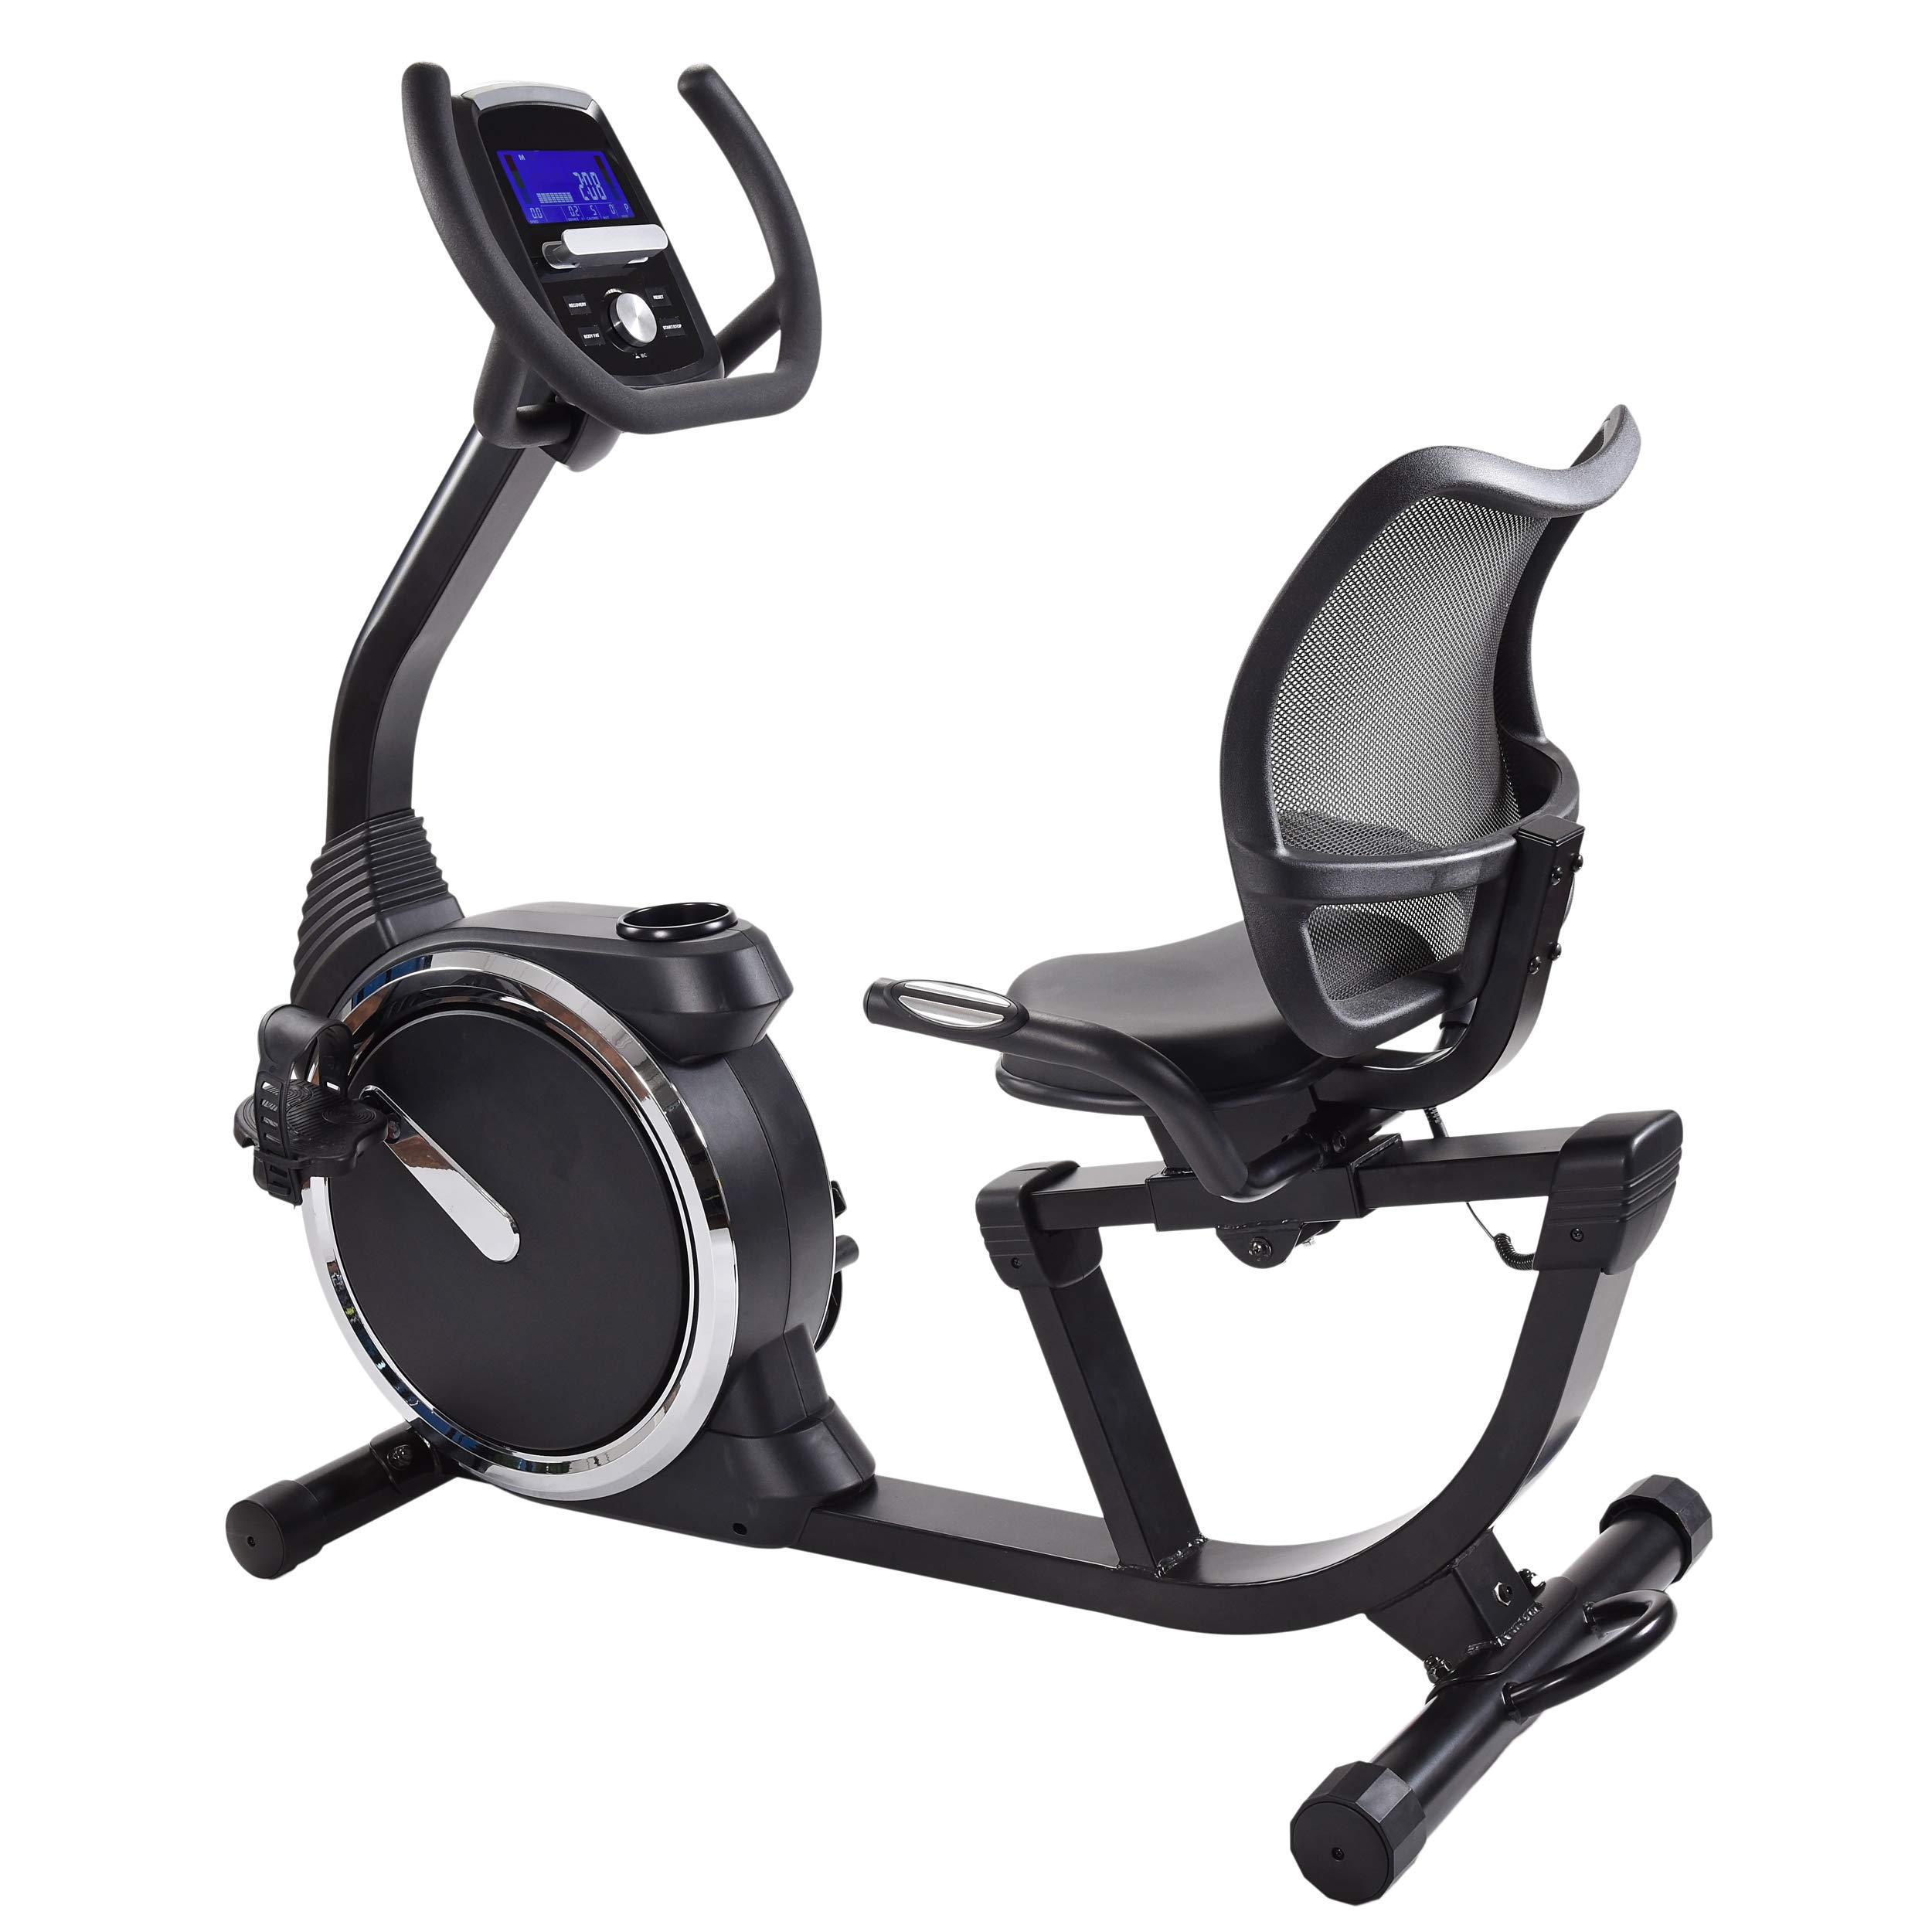 Stamina Deluxe Magnetic Recumbent Exercise Bike - Smart Workout App, No Subscription Required - Stationary Workout Bike for Home